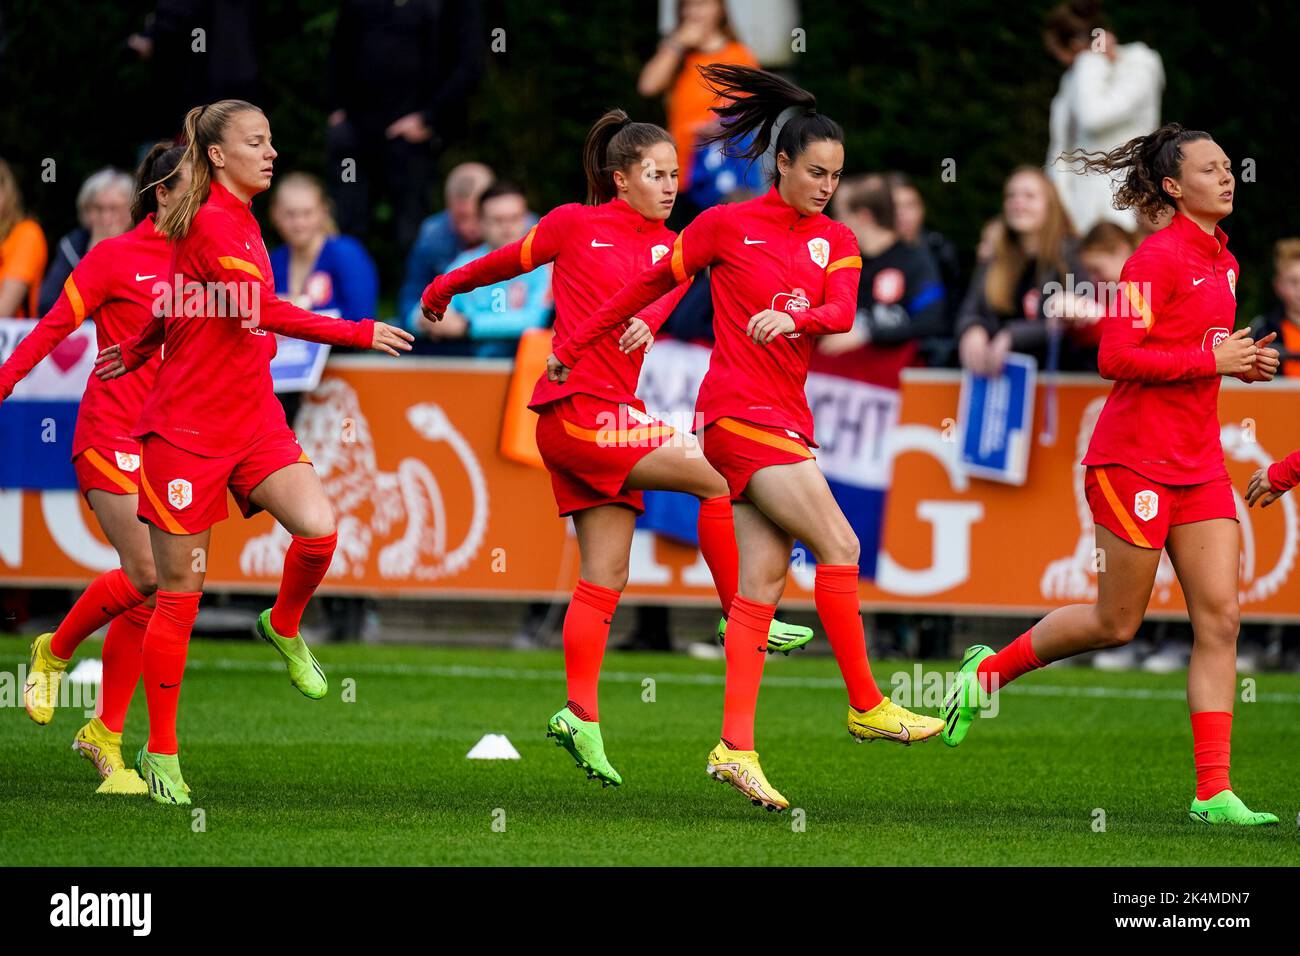 ZEIST, NETHERLANDS - OCTOBER 3: Caitlin Dijkstra of the Netherlands during a Training Session of the Netherlands Women’s Football Team at the KNVB Campus on October 3, 2022 in Zeist, Netherlands (Photo by Joris Verwijst/Orange Pictures) Stock Photo